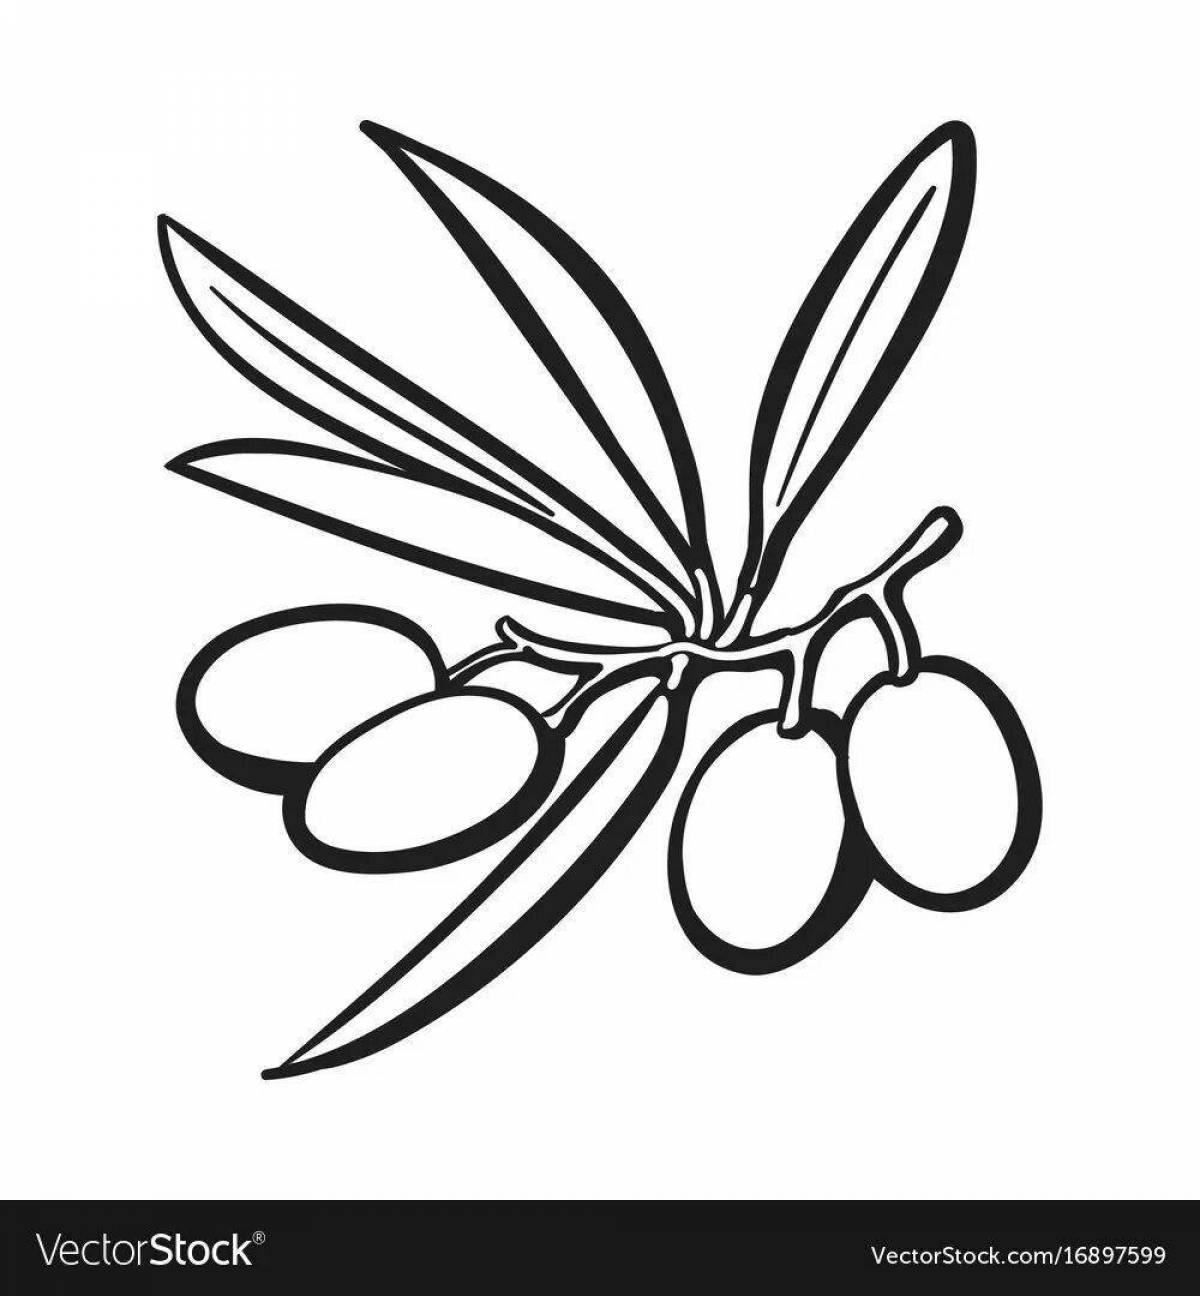 Charming olives coloring pages